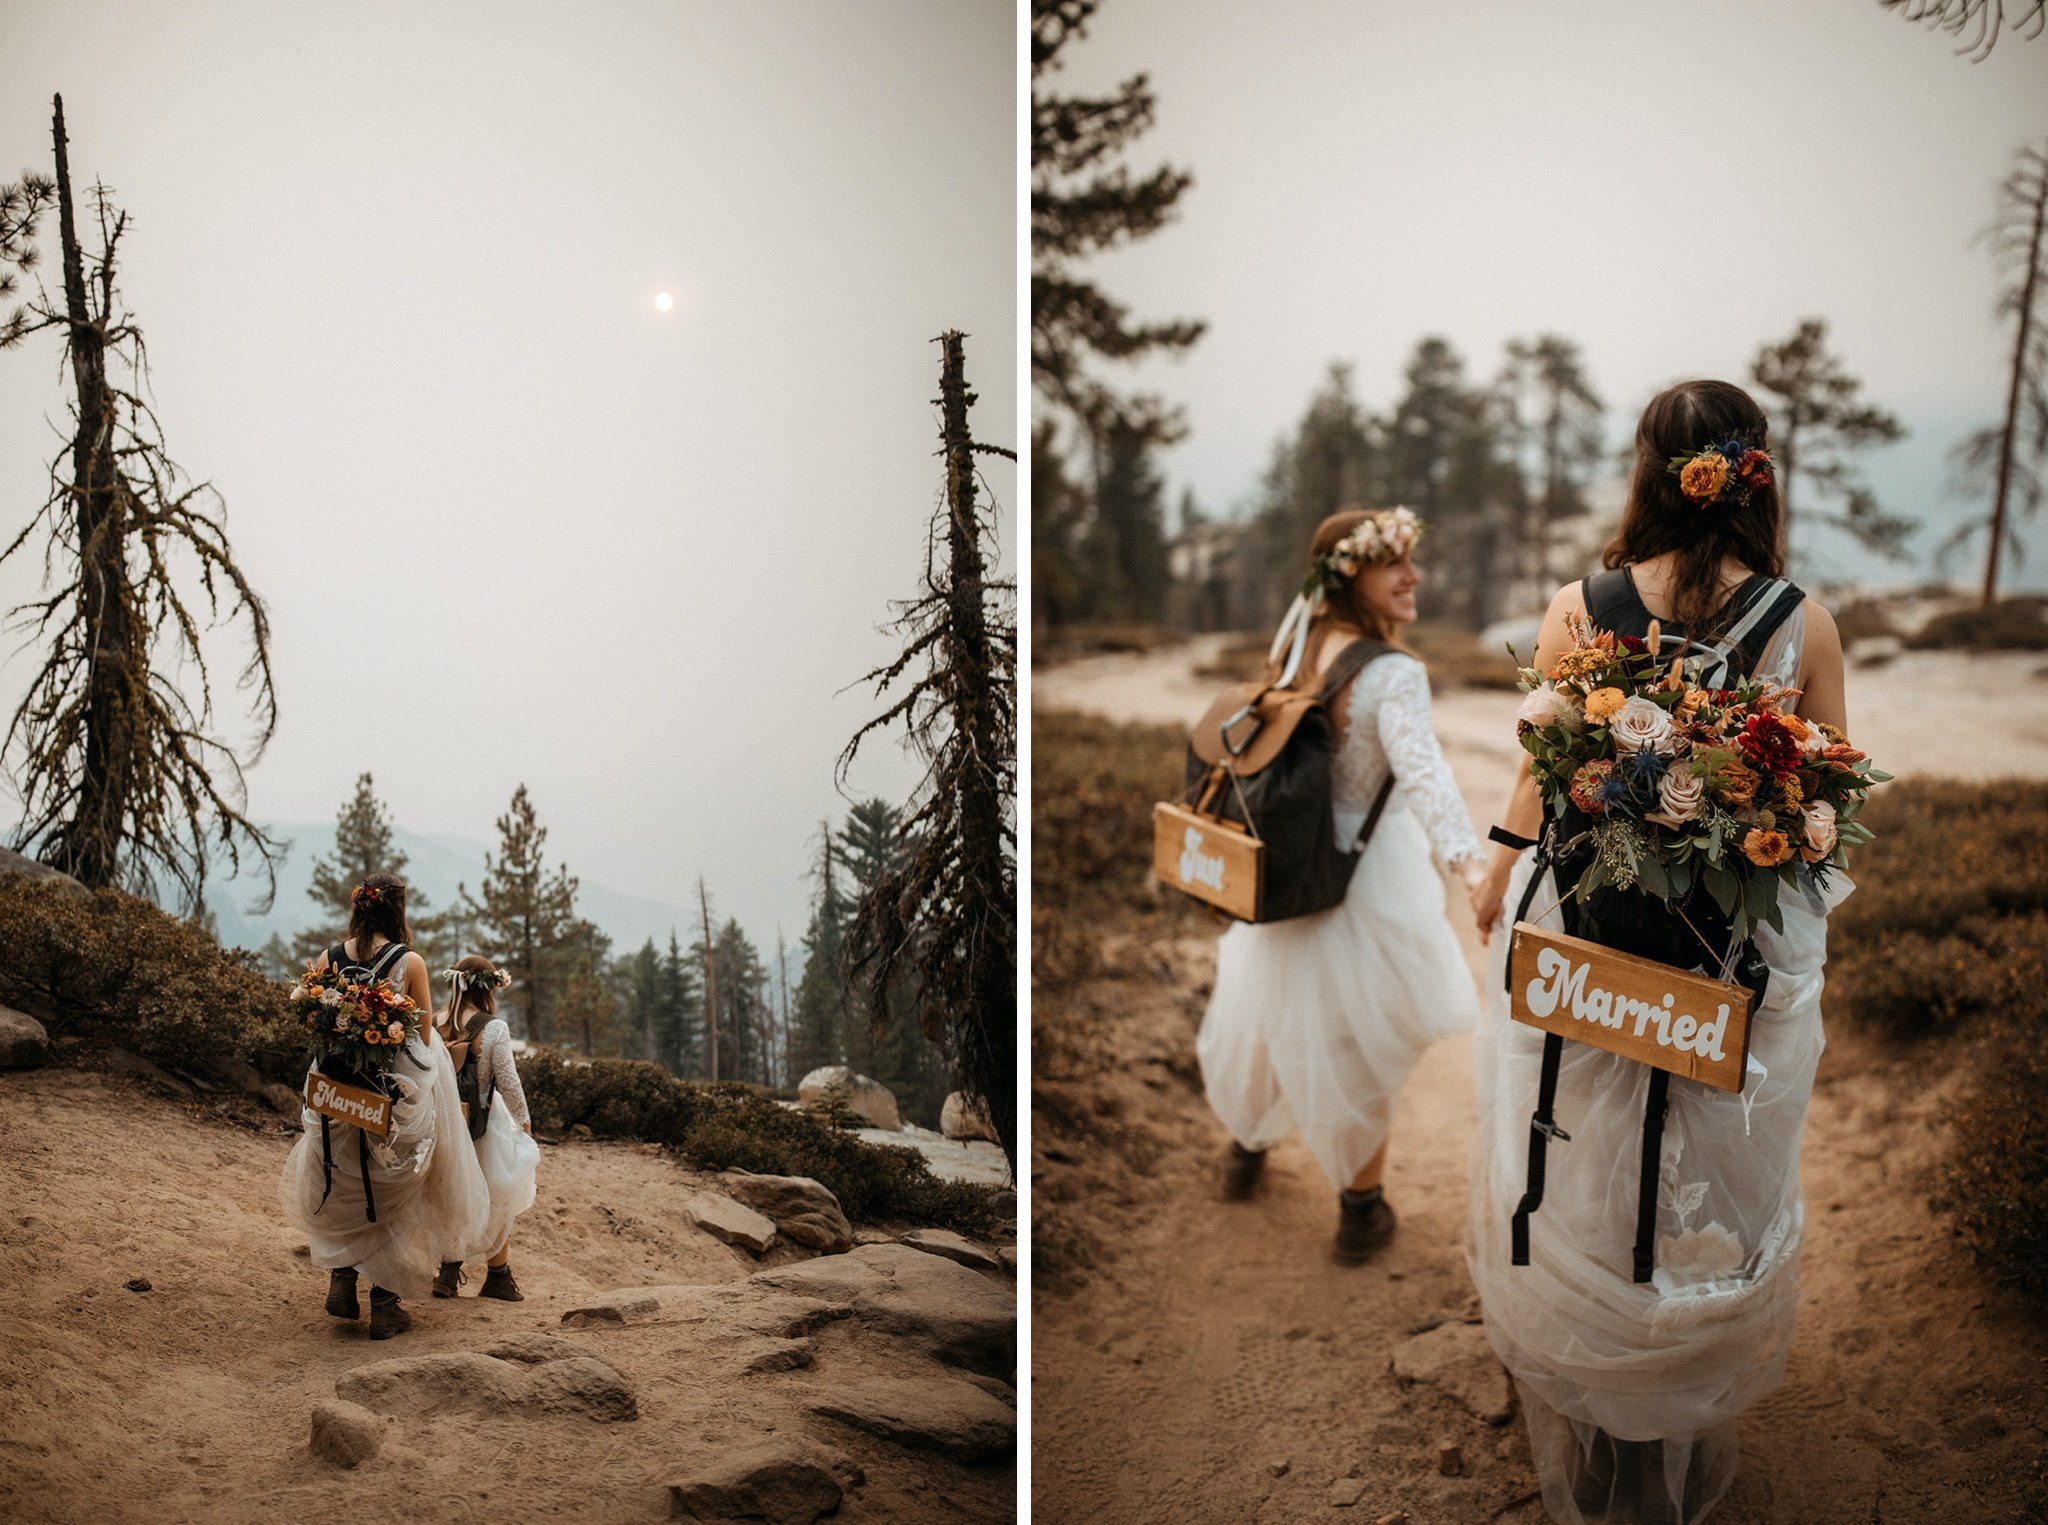 Yosemite National Park Elopement with Two Brides-Will Khoury32.jpg